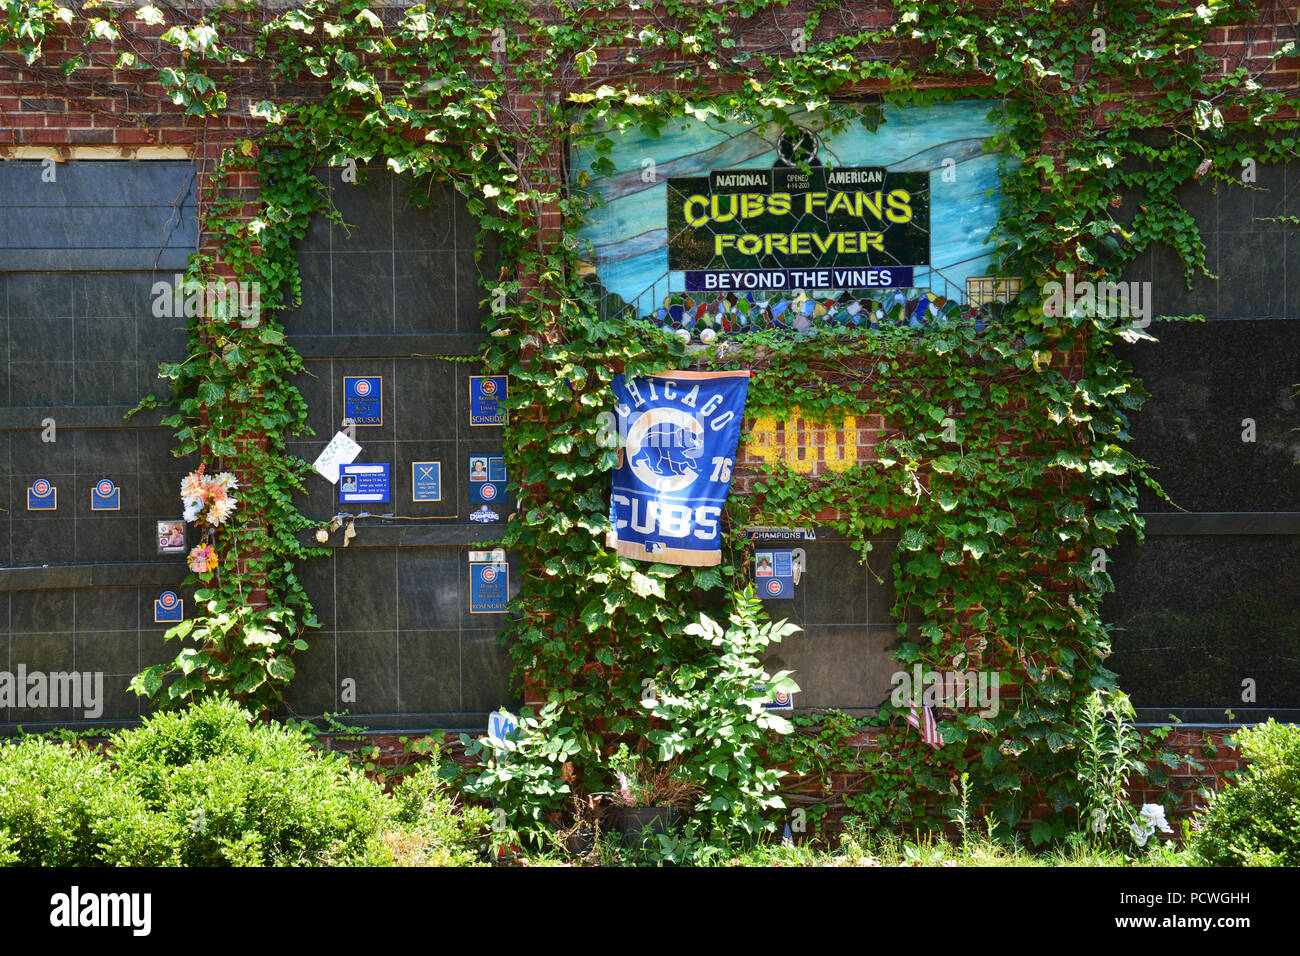 Beyond The Vines is a Chicago Cubs themed columbarium where fans can be interned in a brick outfield wall with ivy and seats from Wrigley Field Stock Photo